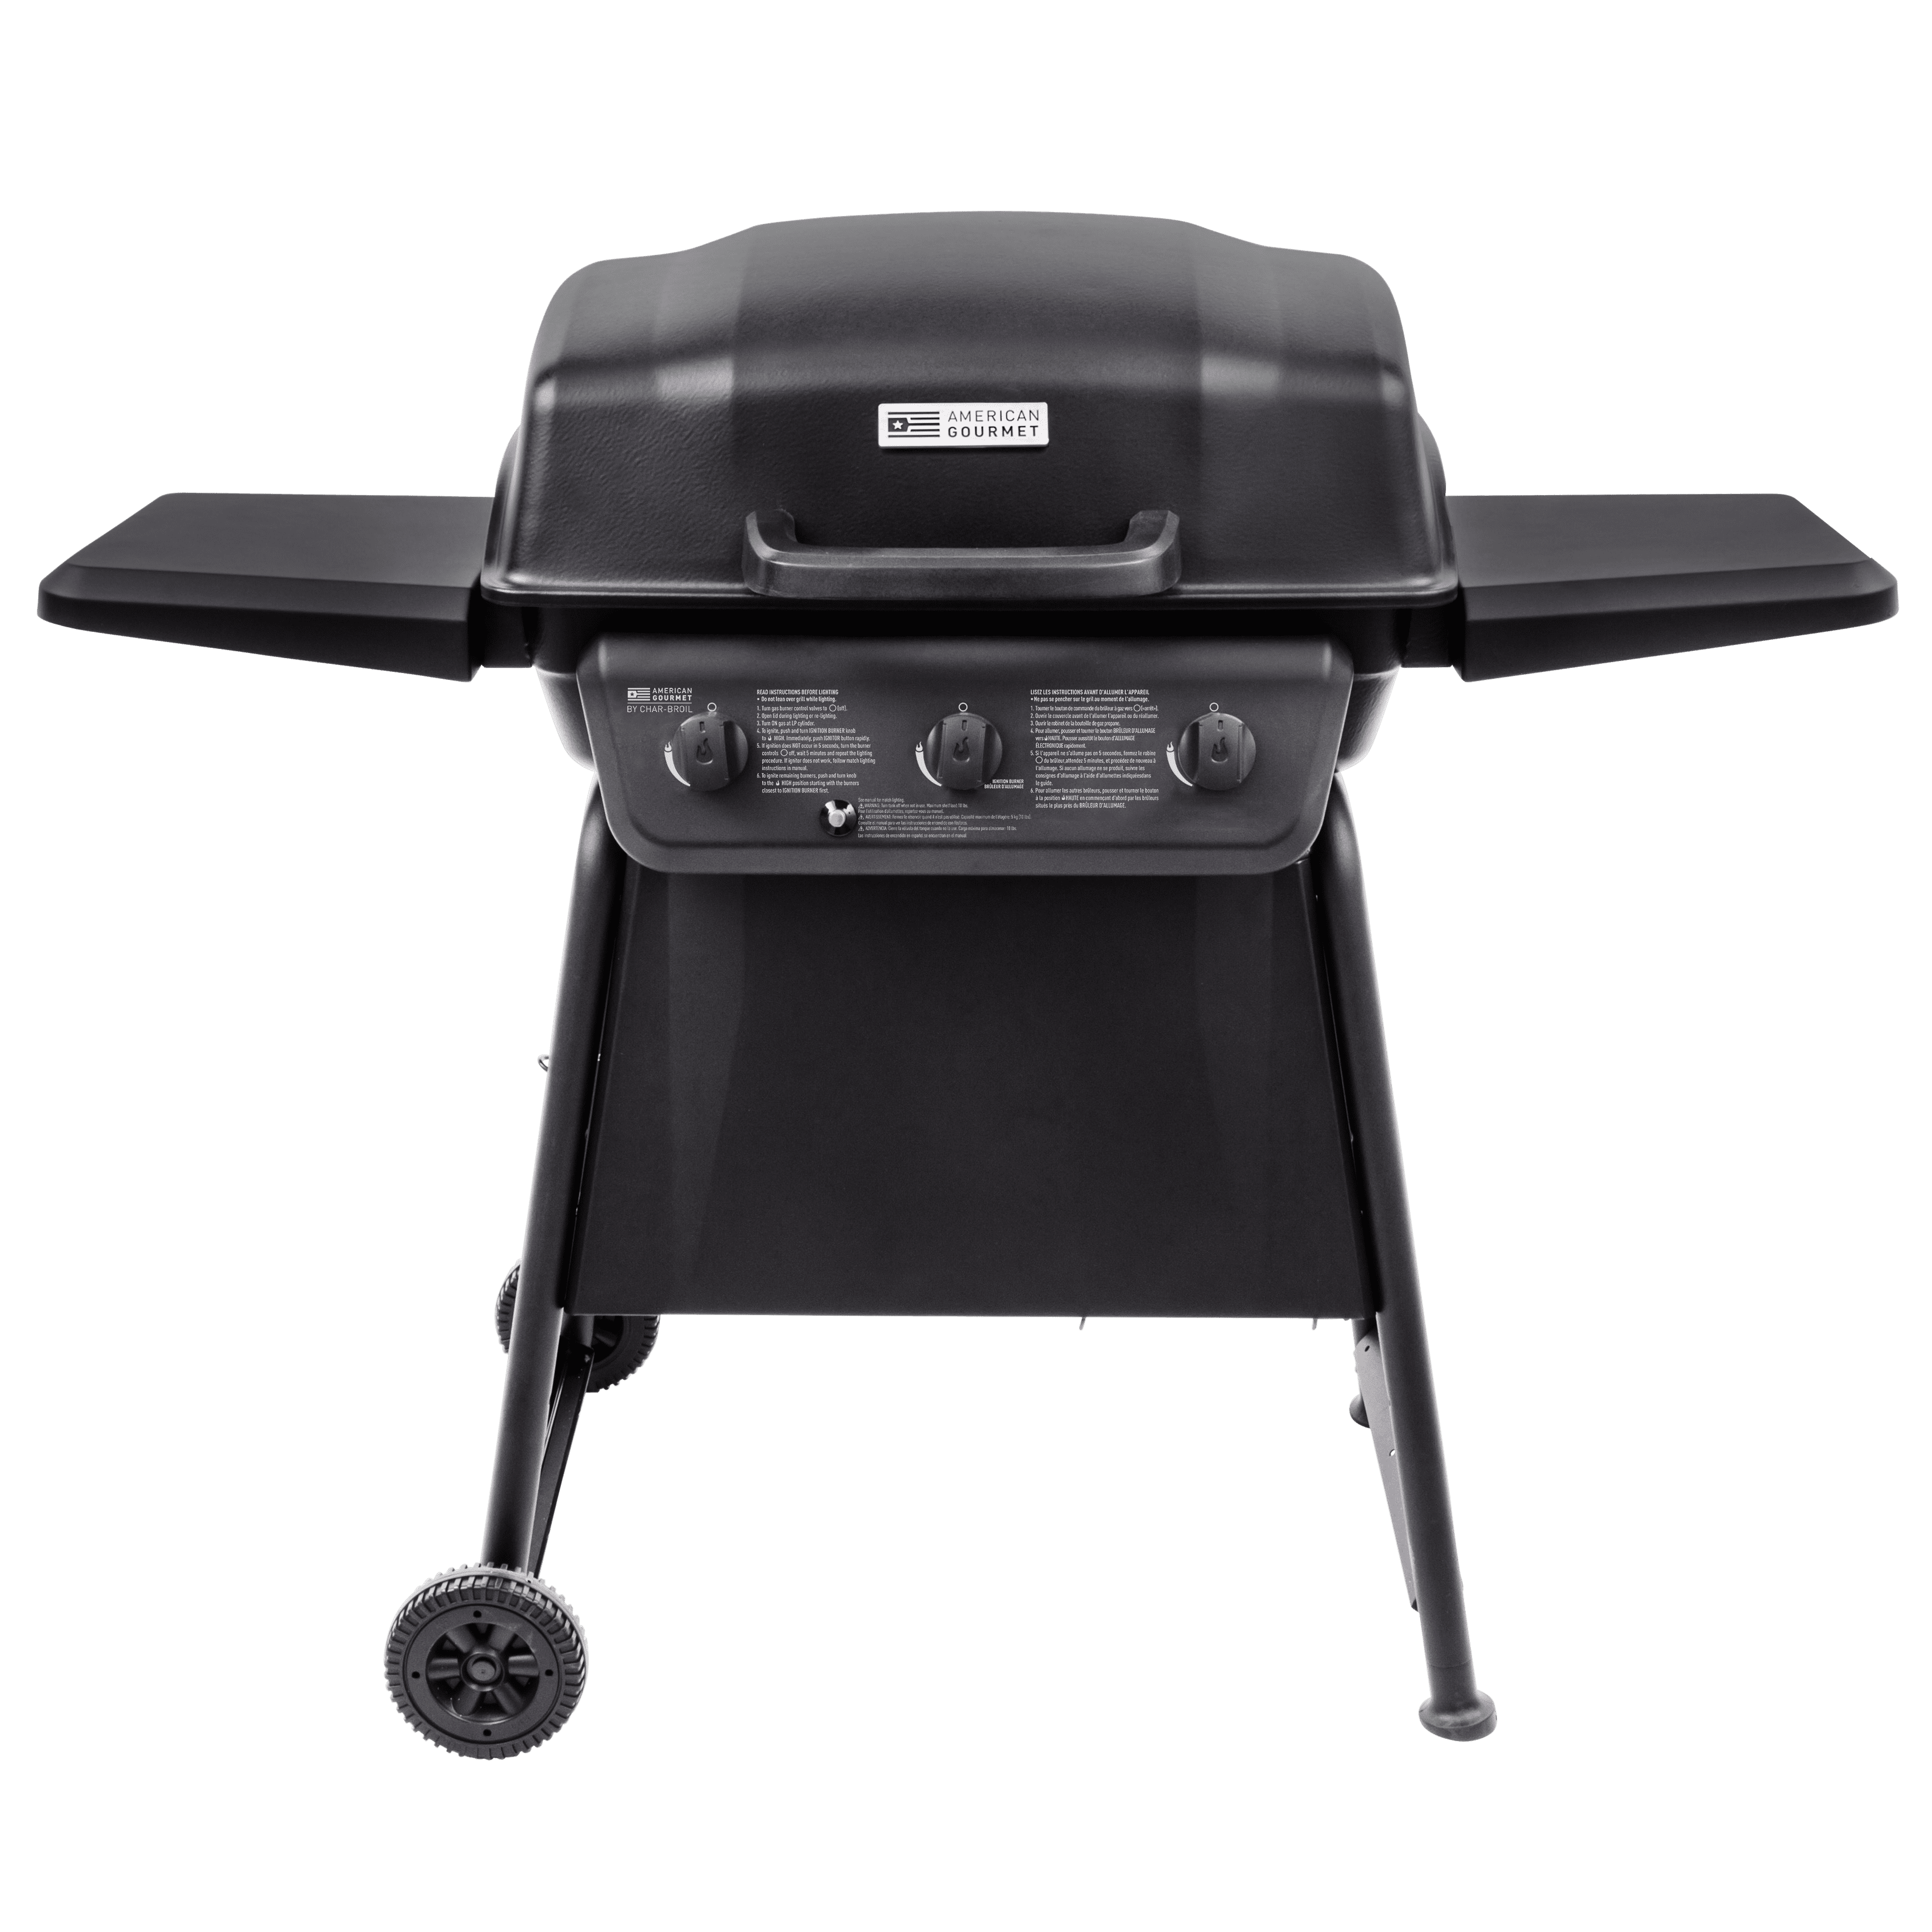 Char-Broil Classic Burner Outdoor Backyard Barbecue Cooking Propane Gas Grill - Walmart.com